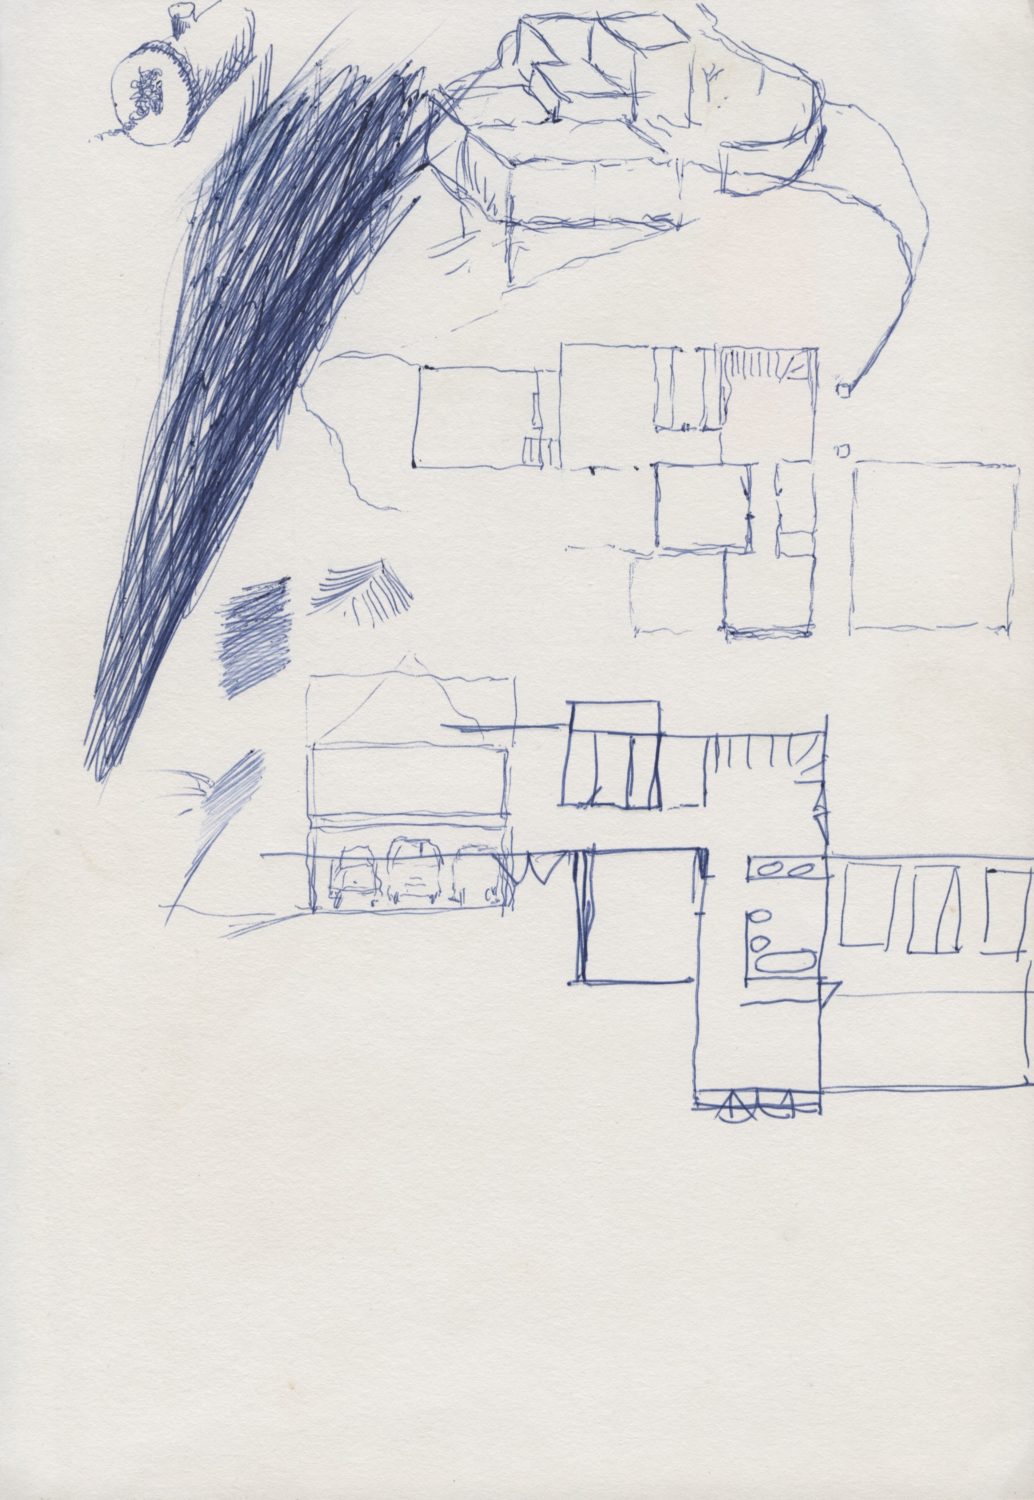 Sketch and notebook (c. 1988 – 1991)